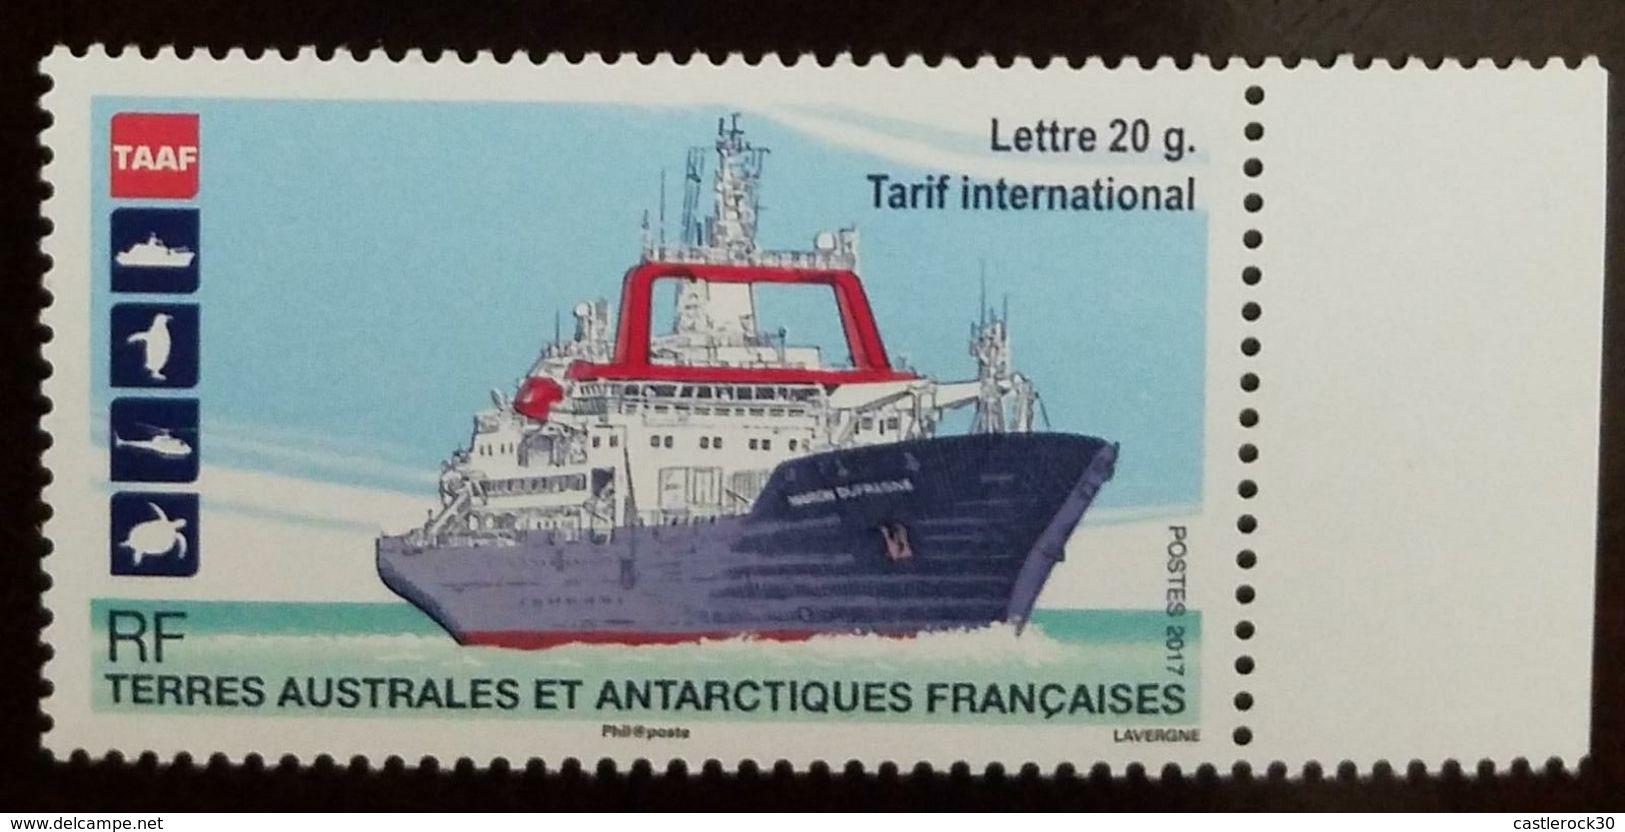 RL) 2017 FRENCH SOUTHERN AND ANTARCTIC LANDS, BOAT, SEA, TAAF, LETTER 20G, PENGUIN, HELICOPTER, MNH - Nuevos